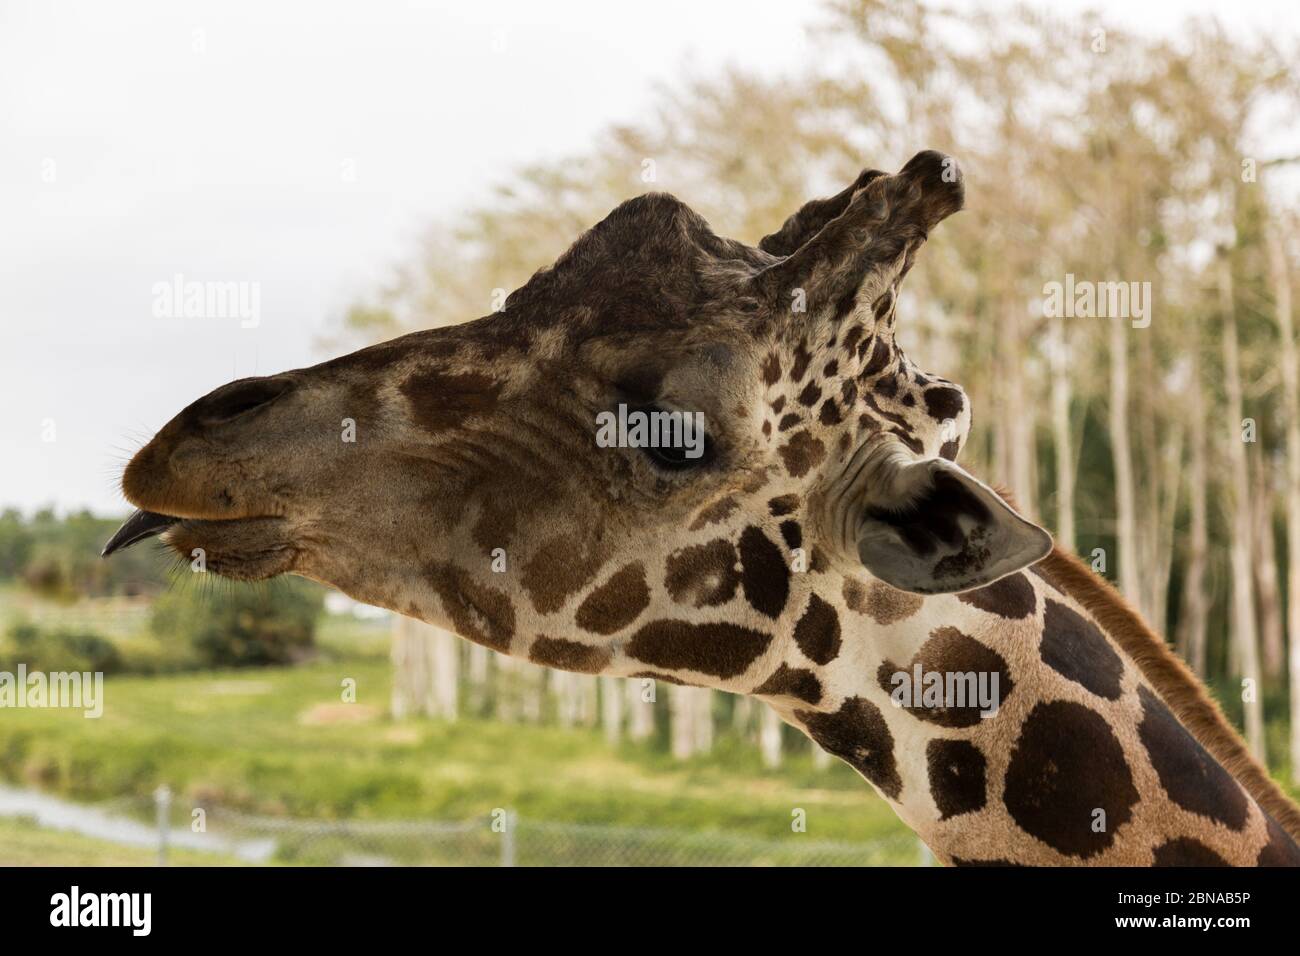 A giraffe sticks his tongue out for guests at Lion Country Safari in Loxahatchee, Florida, USA. Stock Photo